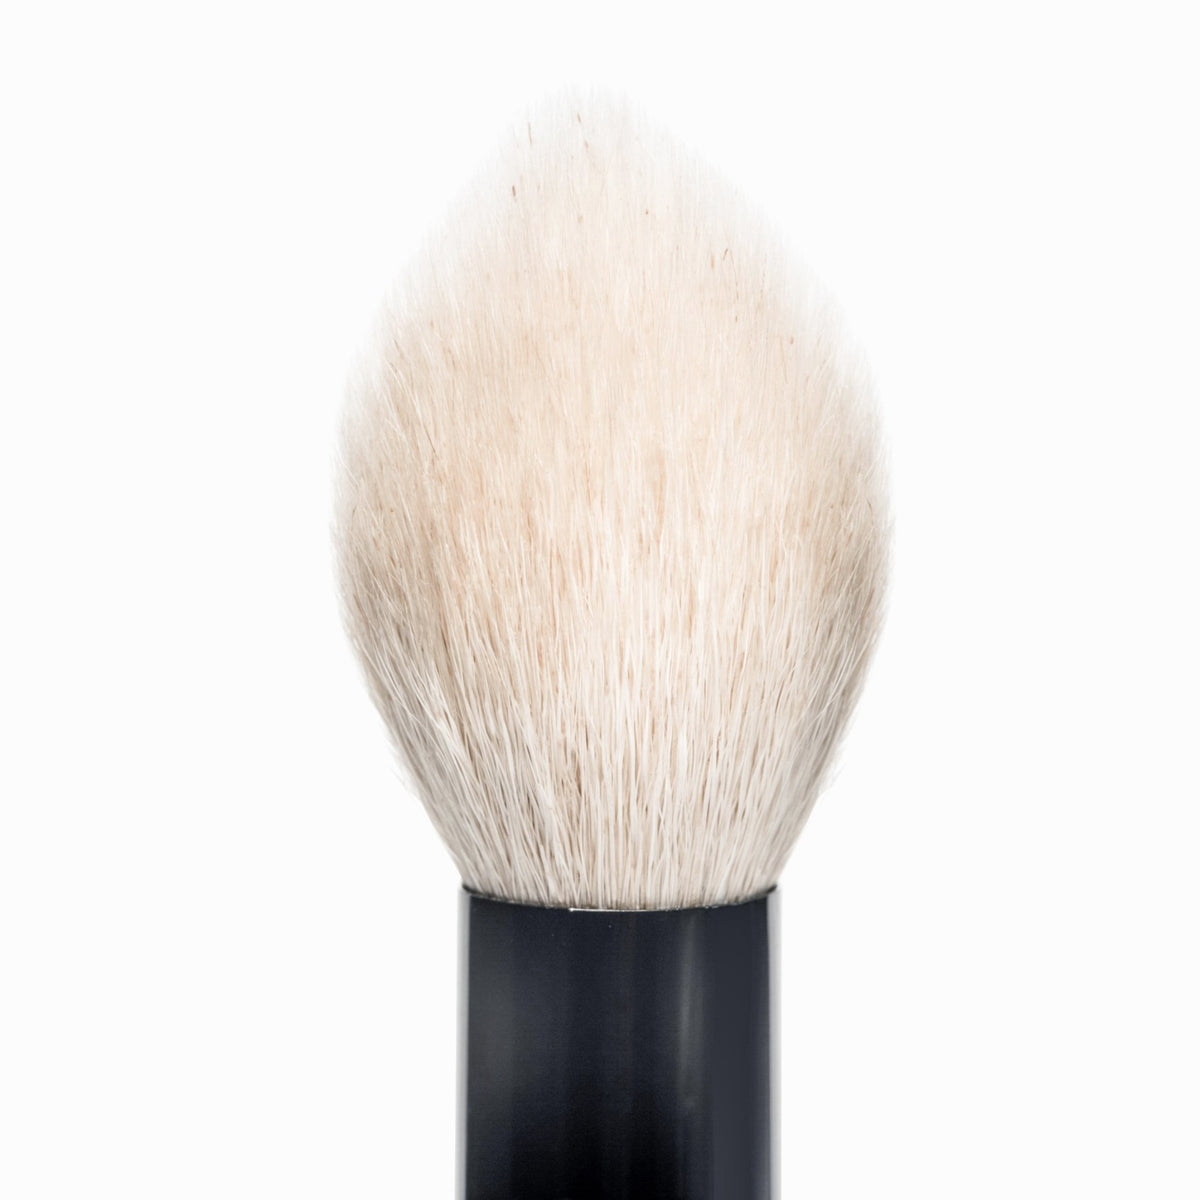 The Glow Brush - For Bronzer, Blush, and all Powders - Jacqueline Kalab Beauty